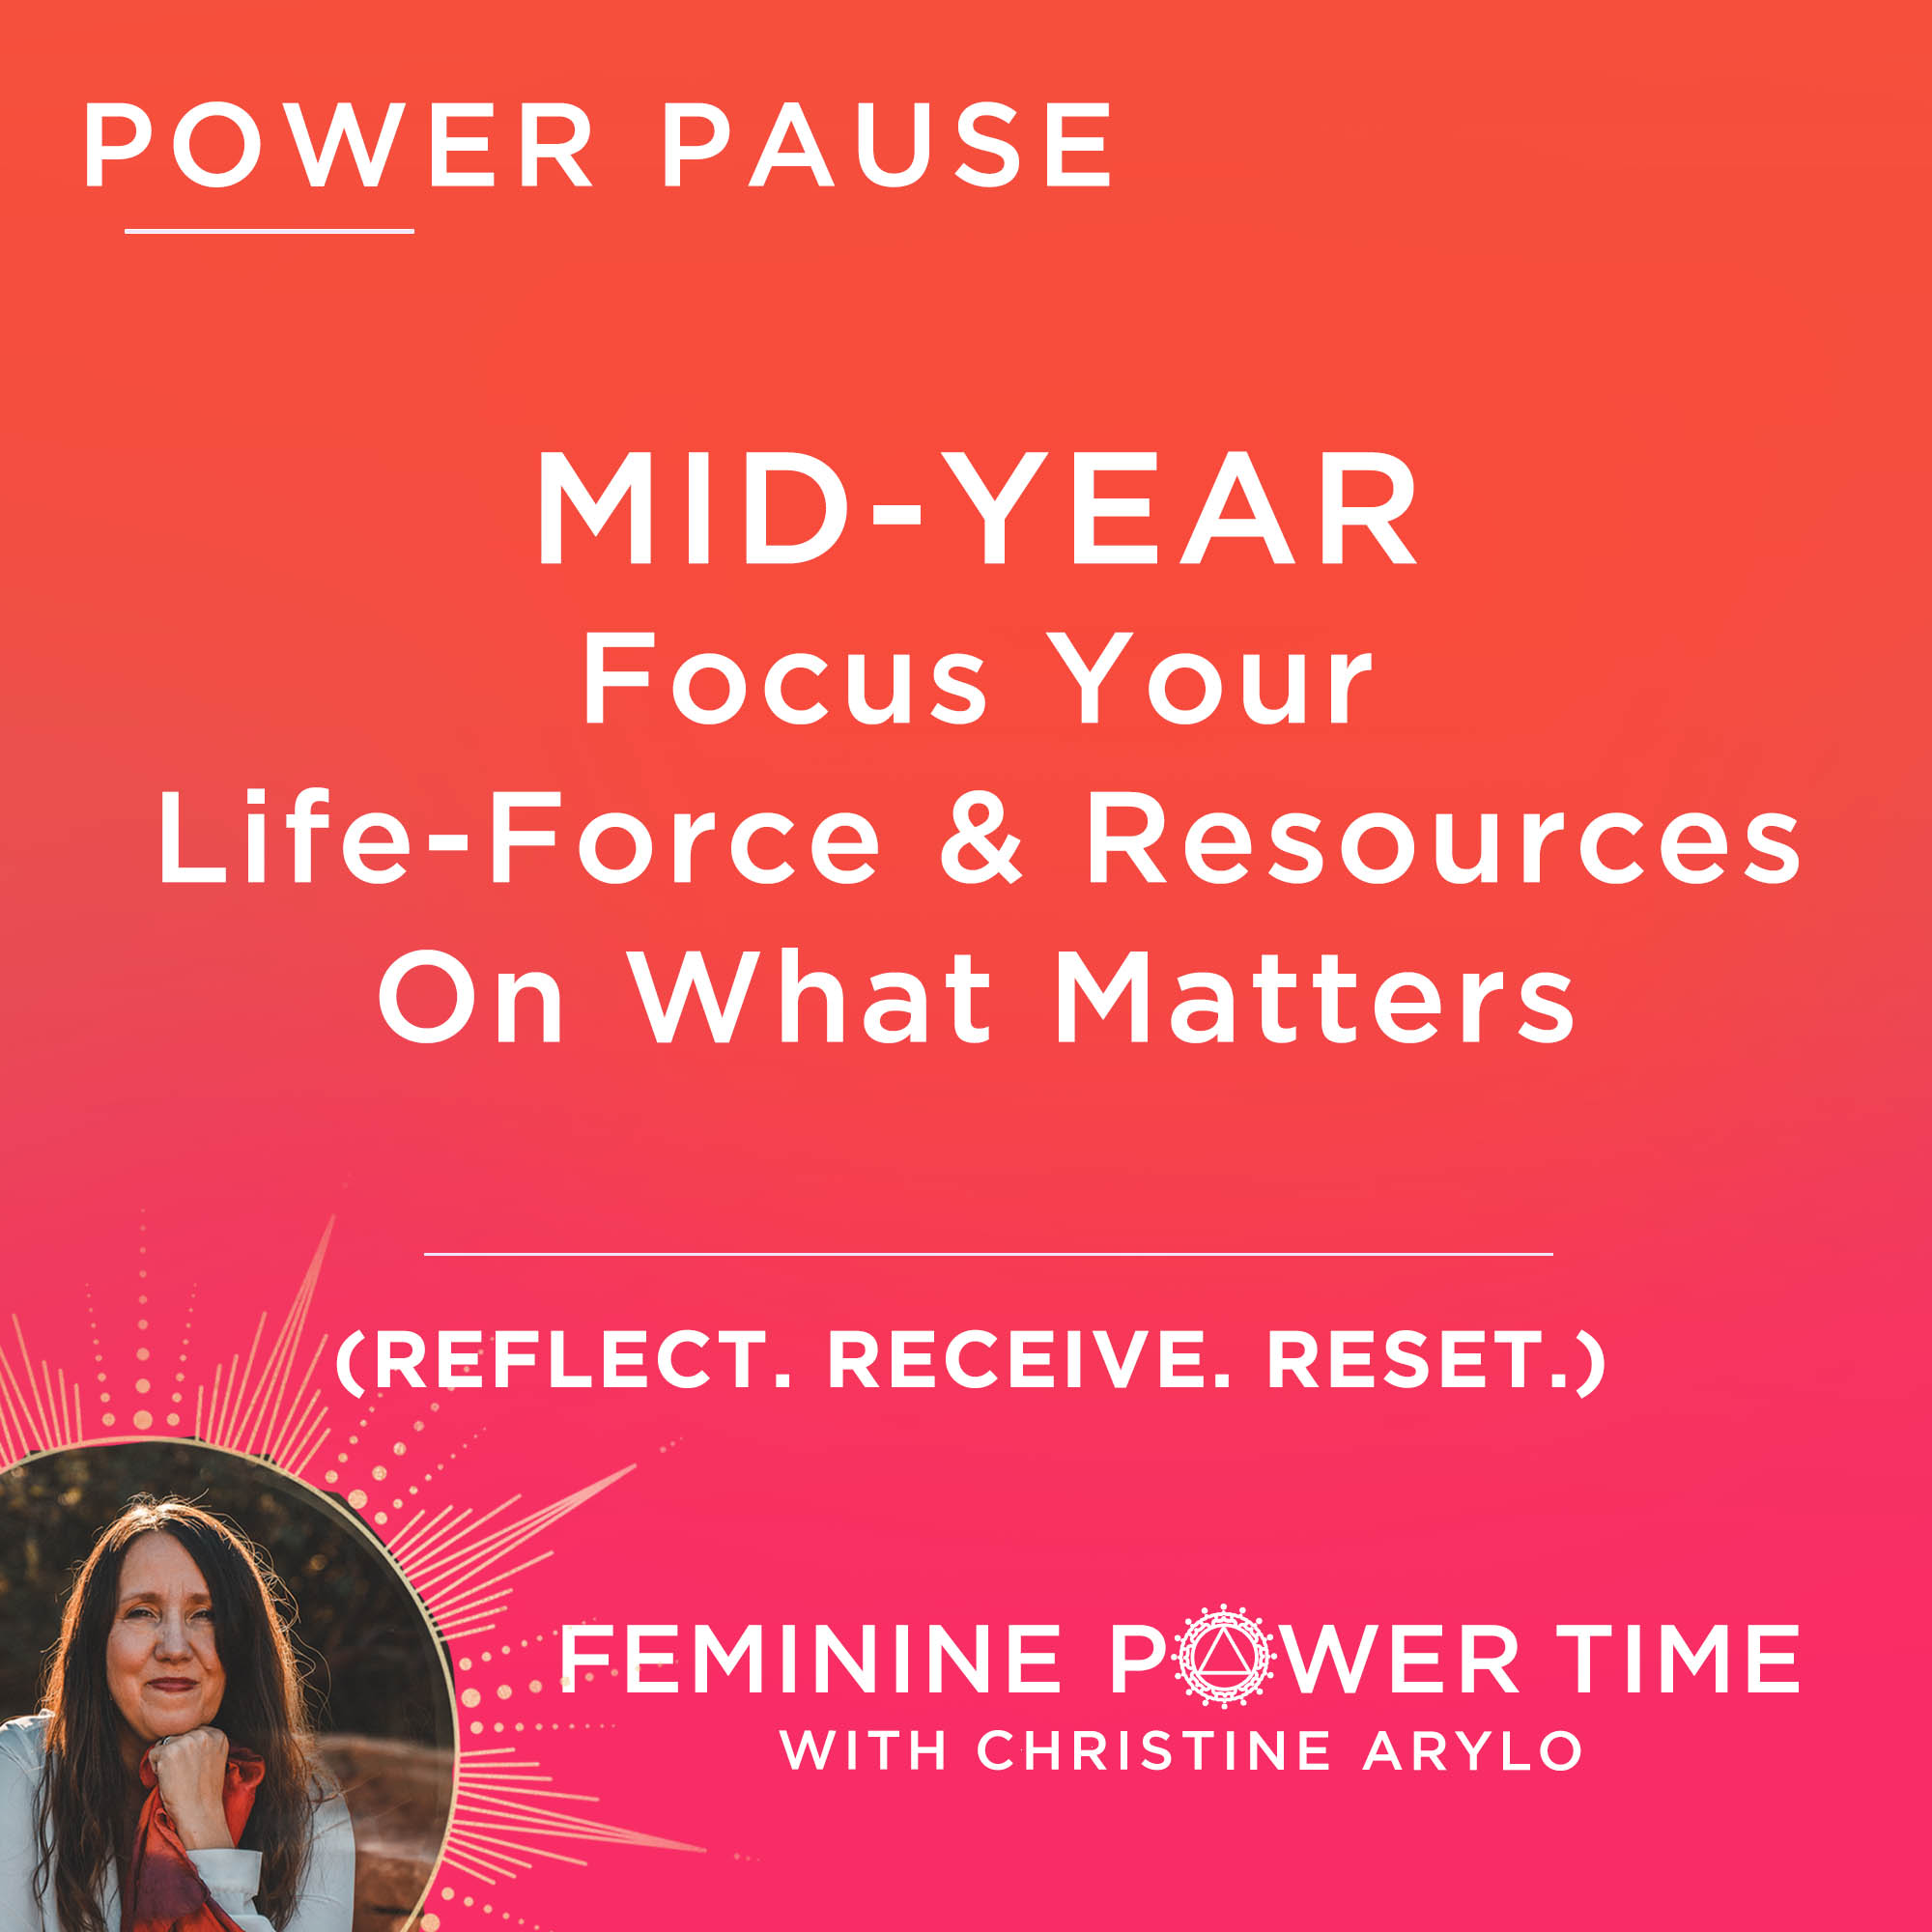 Mid year Power Pause with Christine Arylo